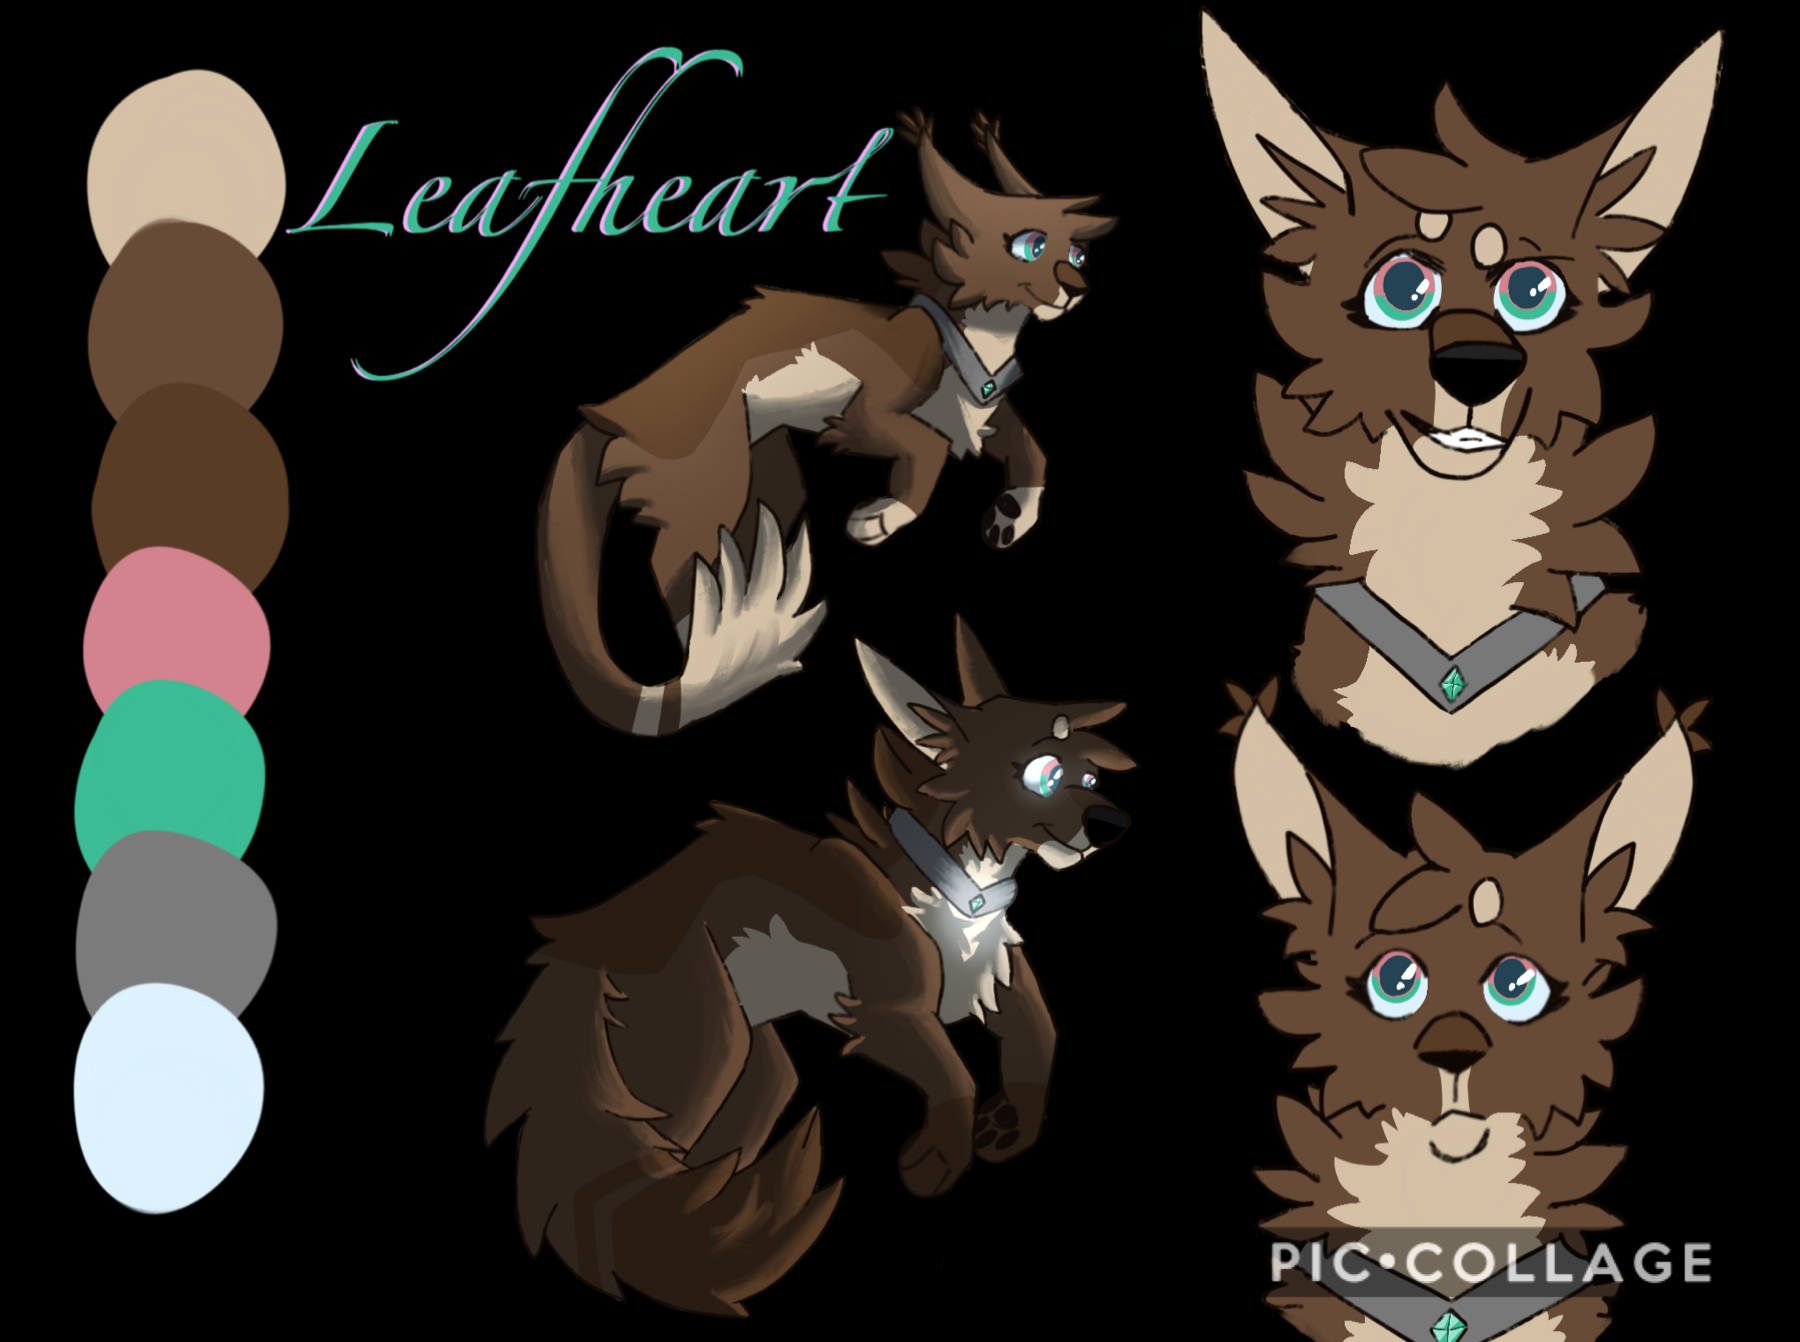 This is a more update design of my character Leafheart cat and dog version it has been a tad bit since I’ve drawn this and I would’ve definitely approached the cat different 